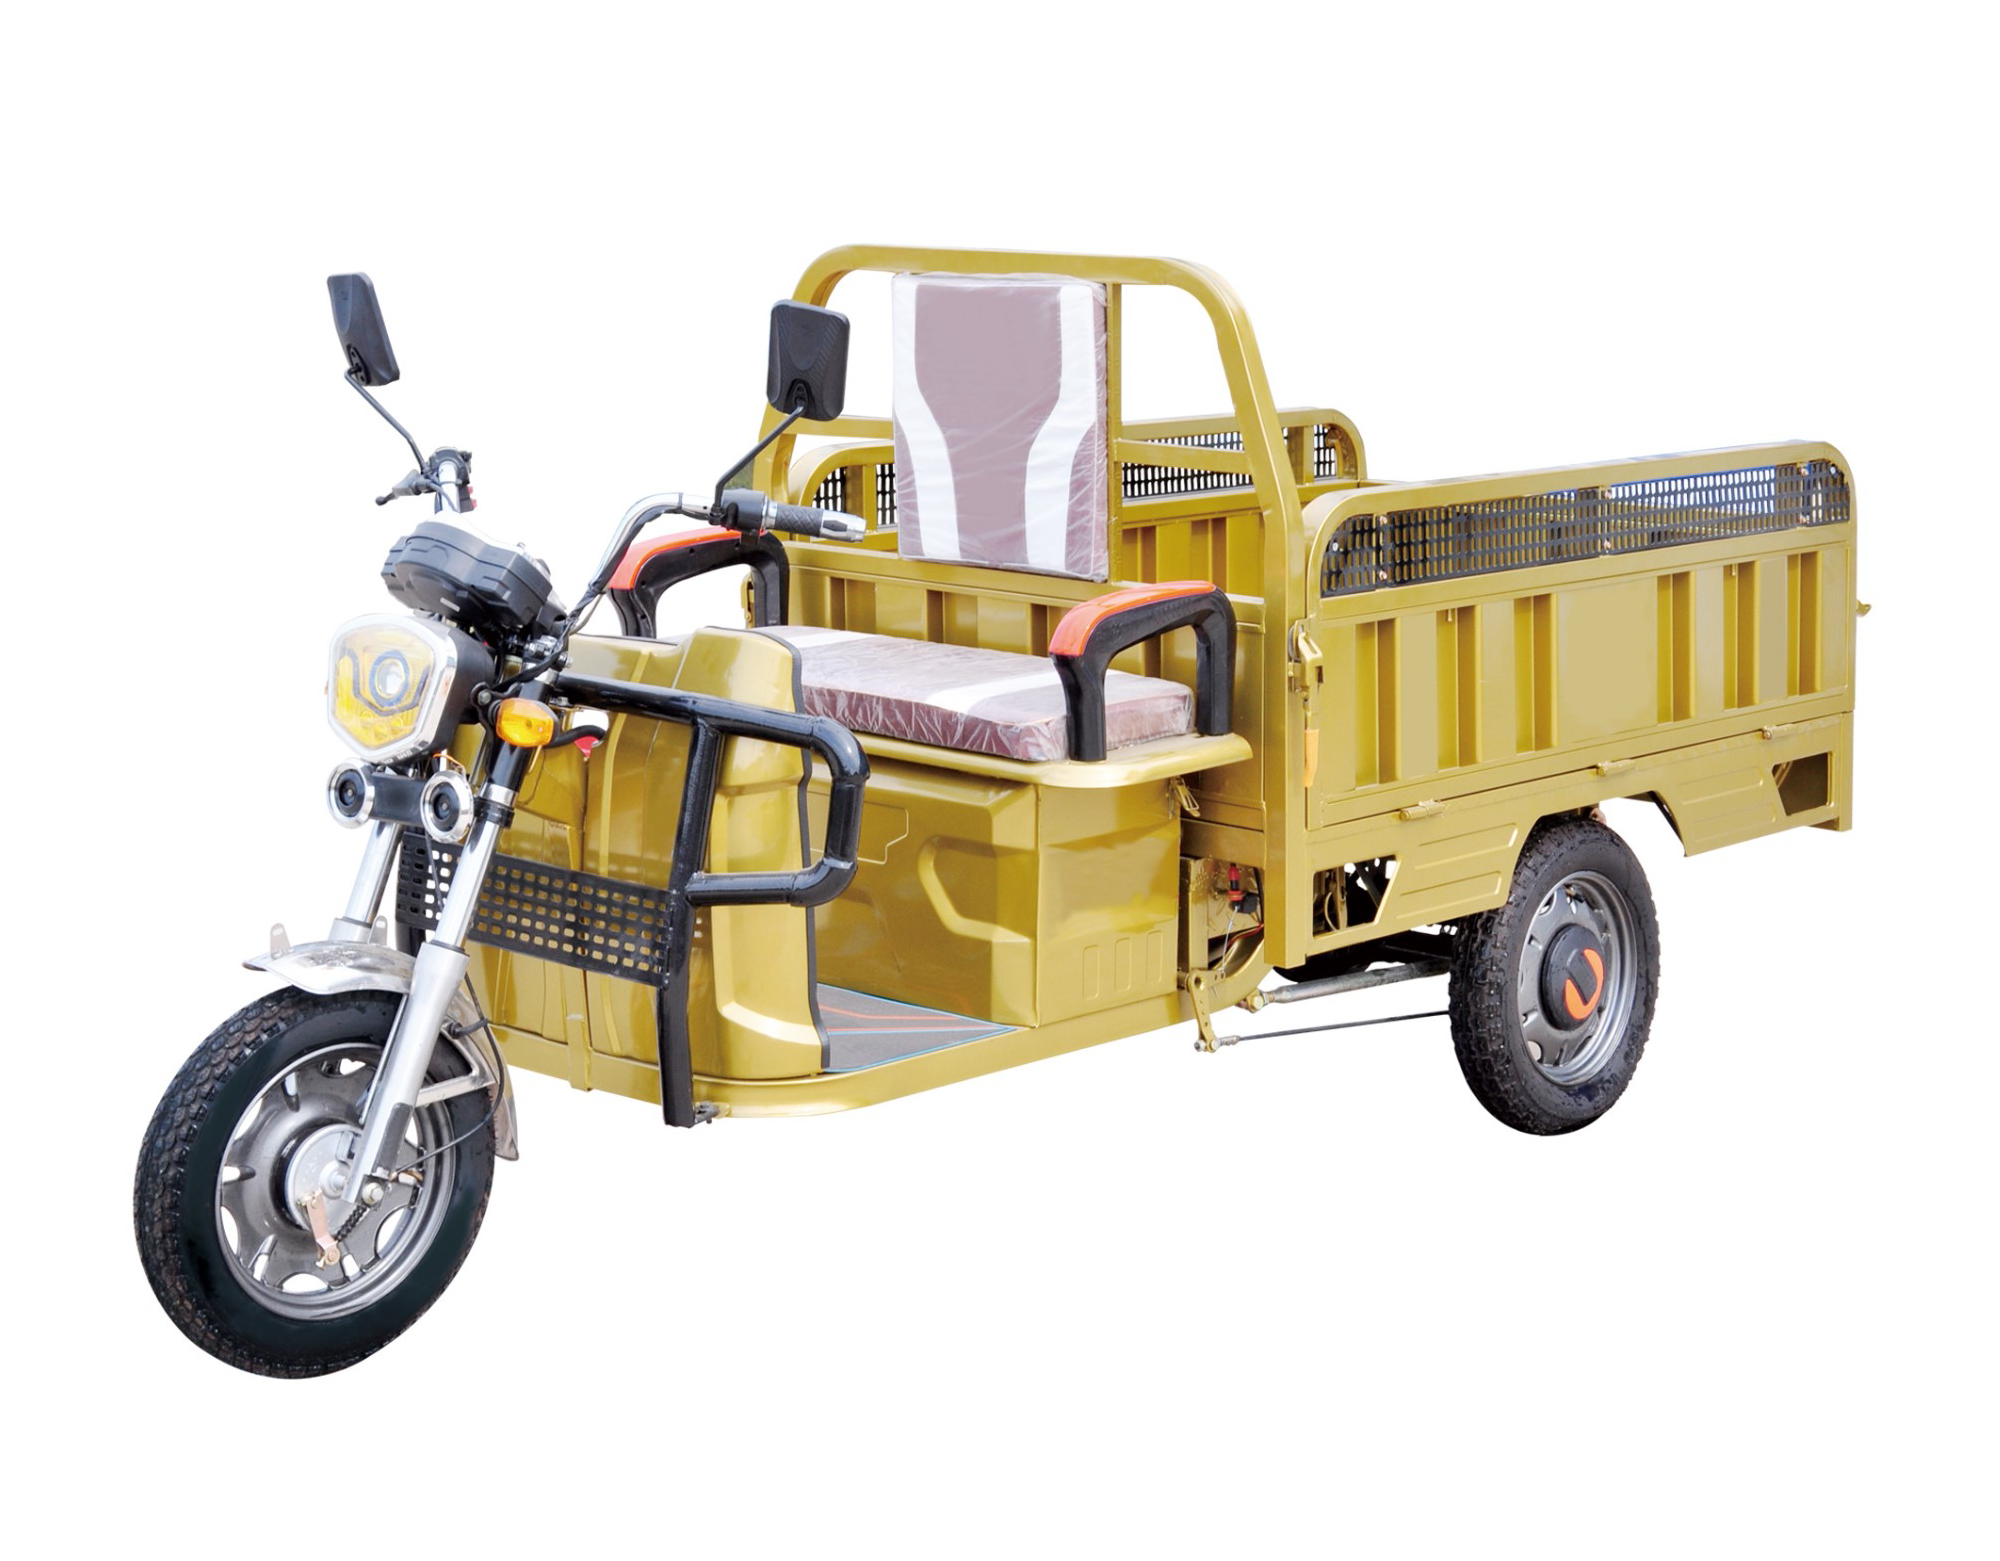 front cargo tricycle